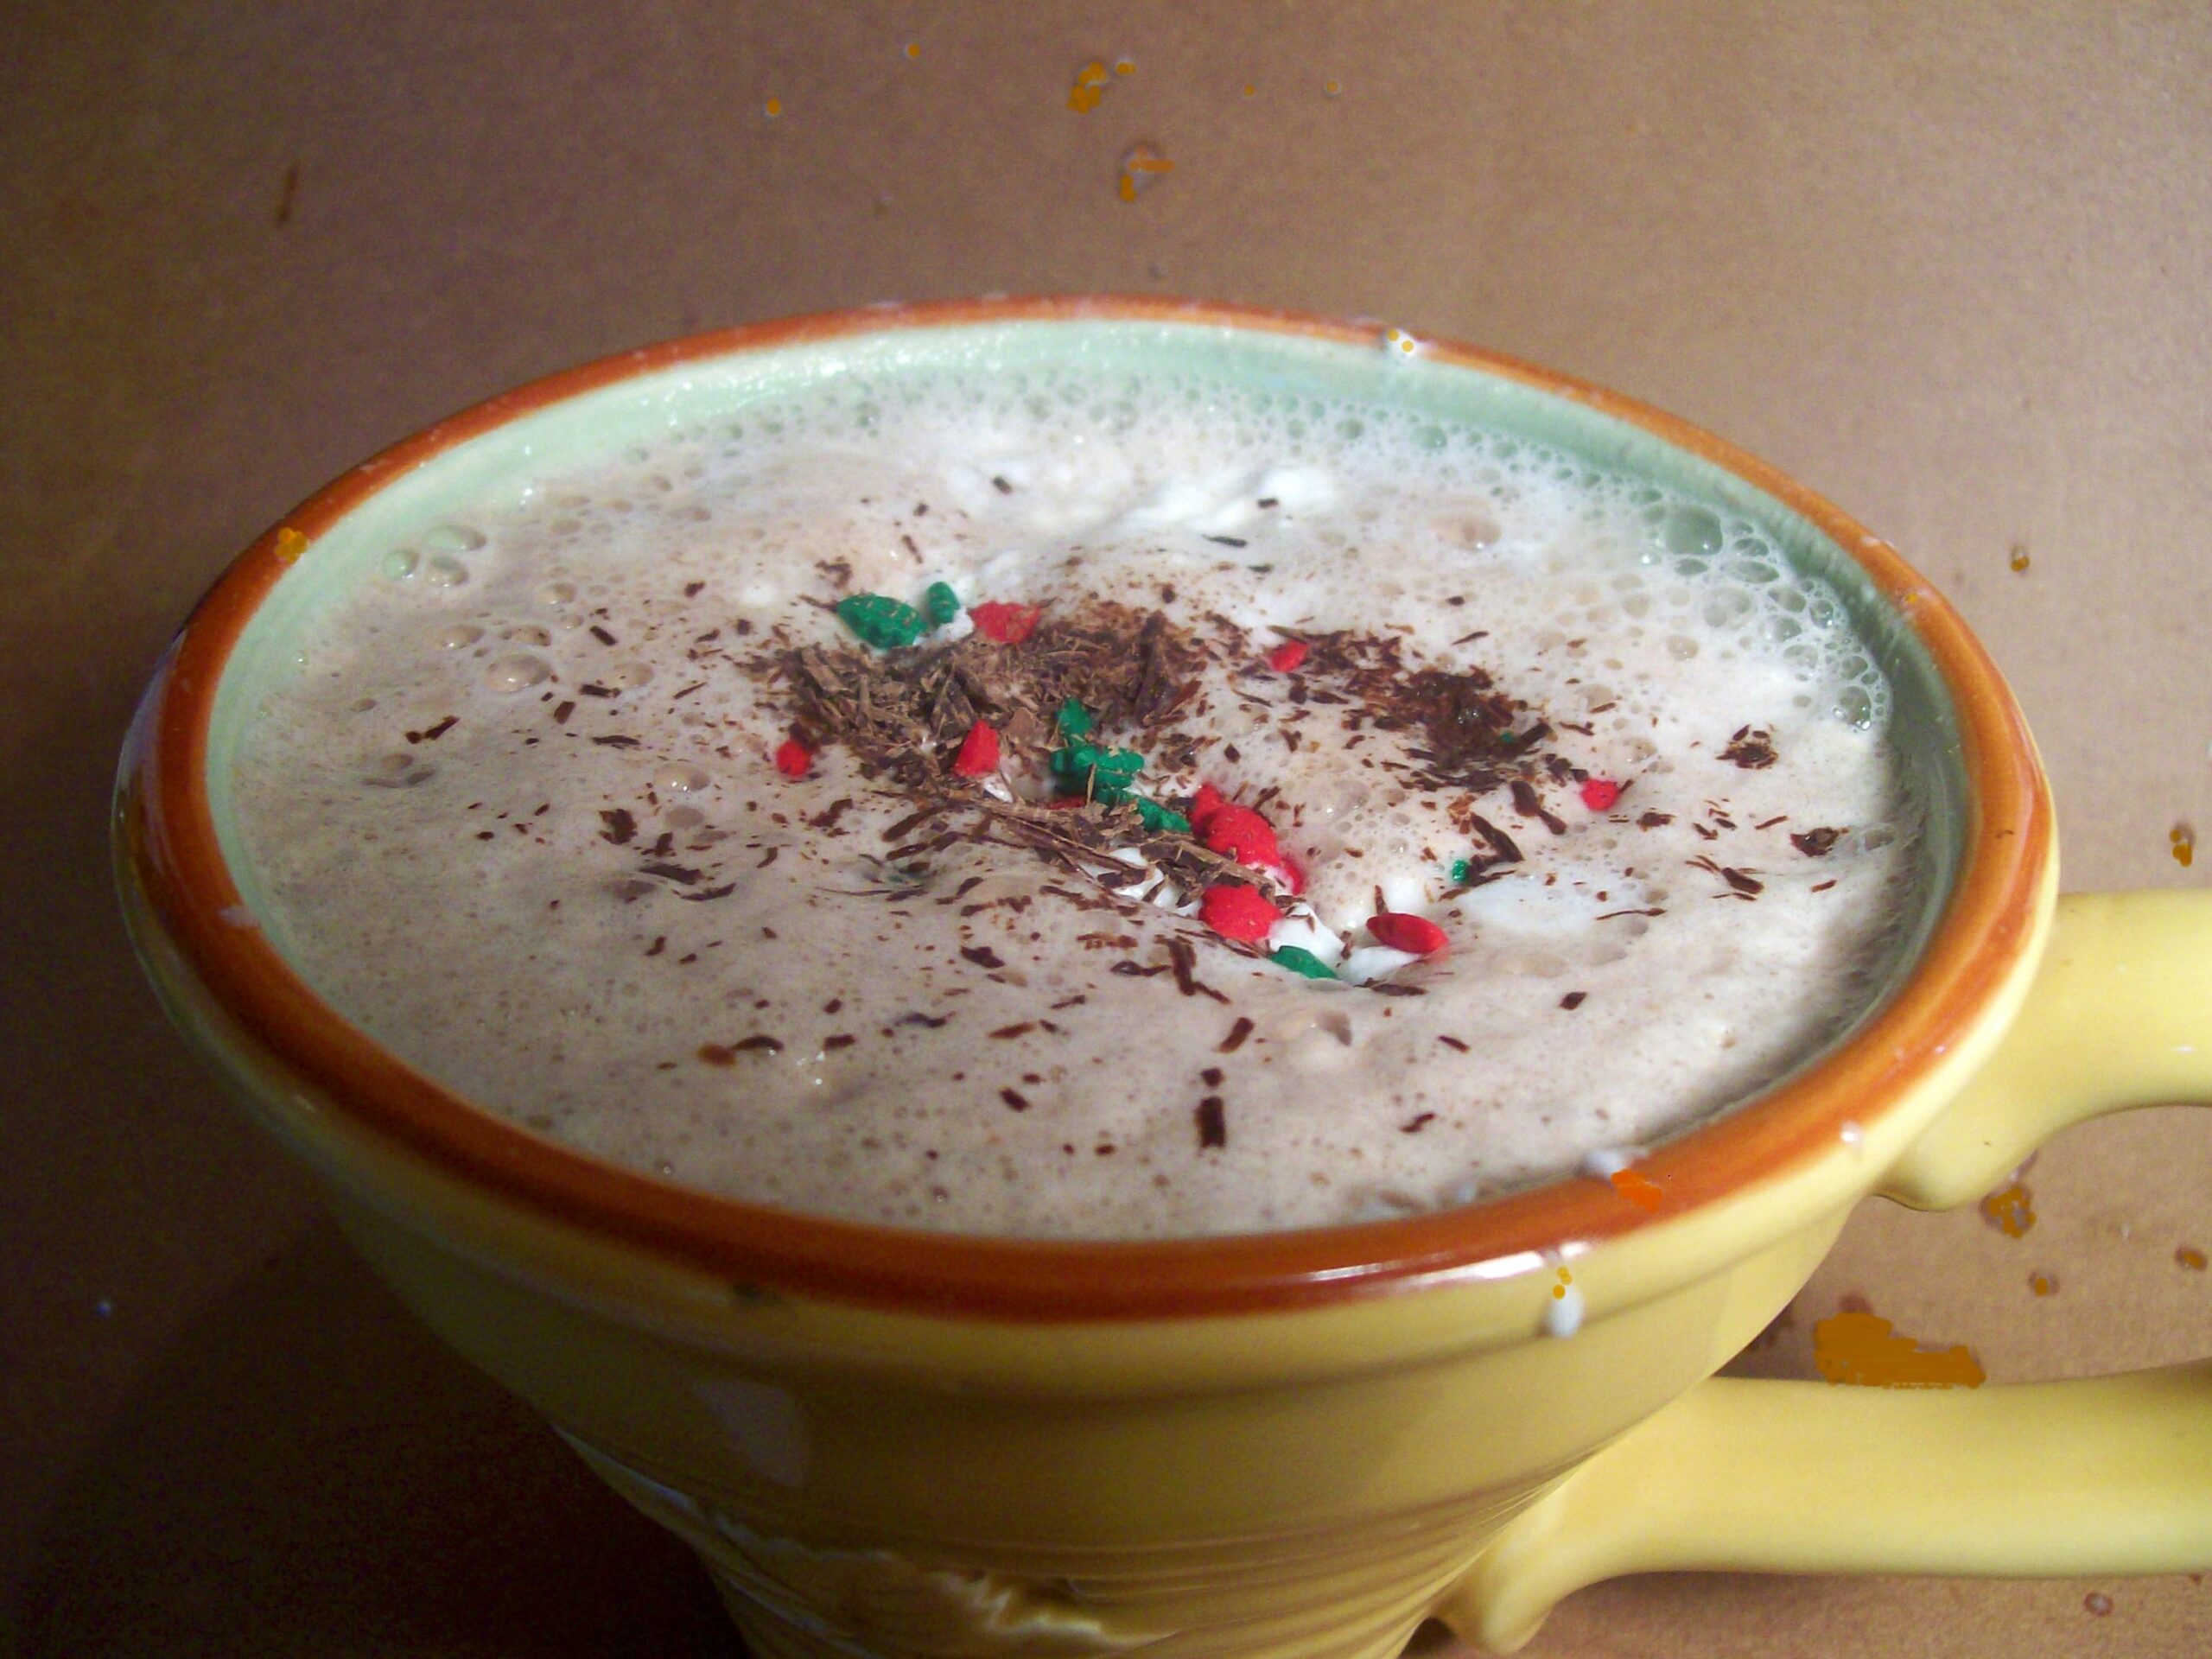  Dive into a decadent delight with this Death by Chocolate Cappuccino!